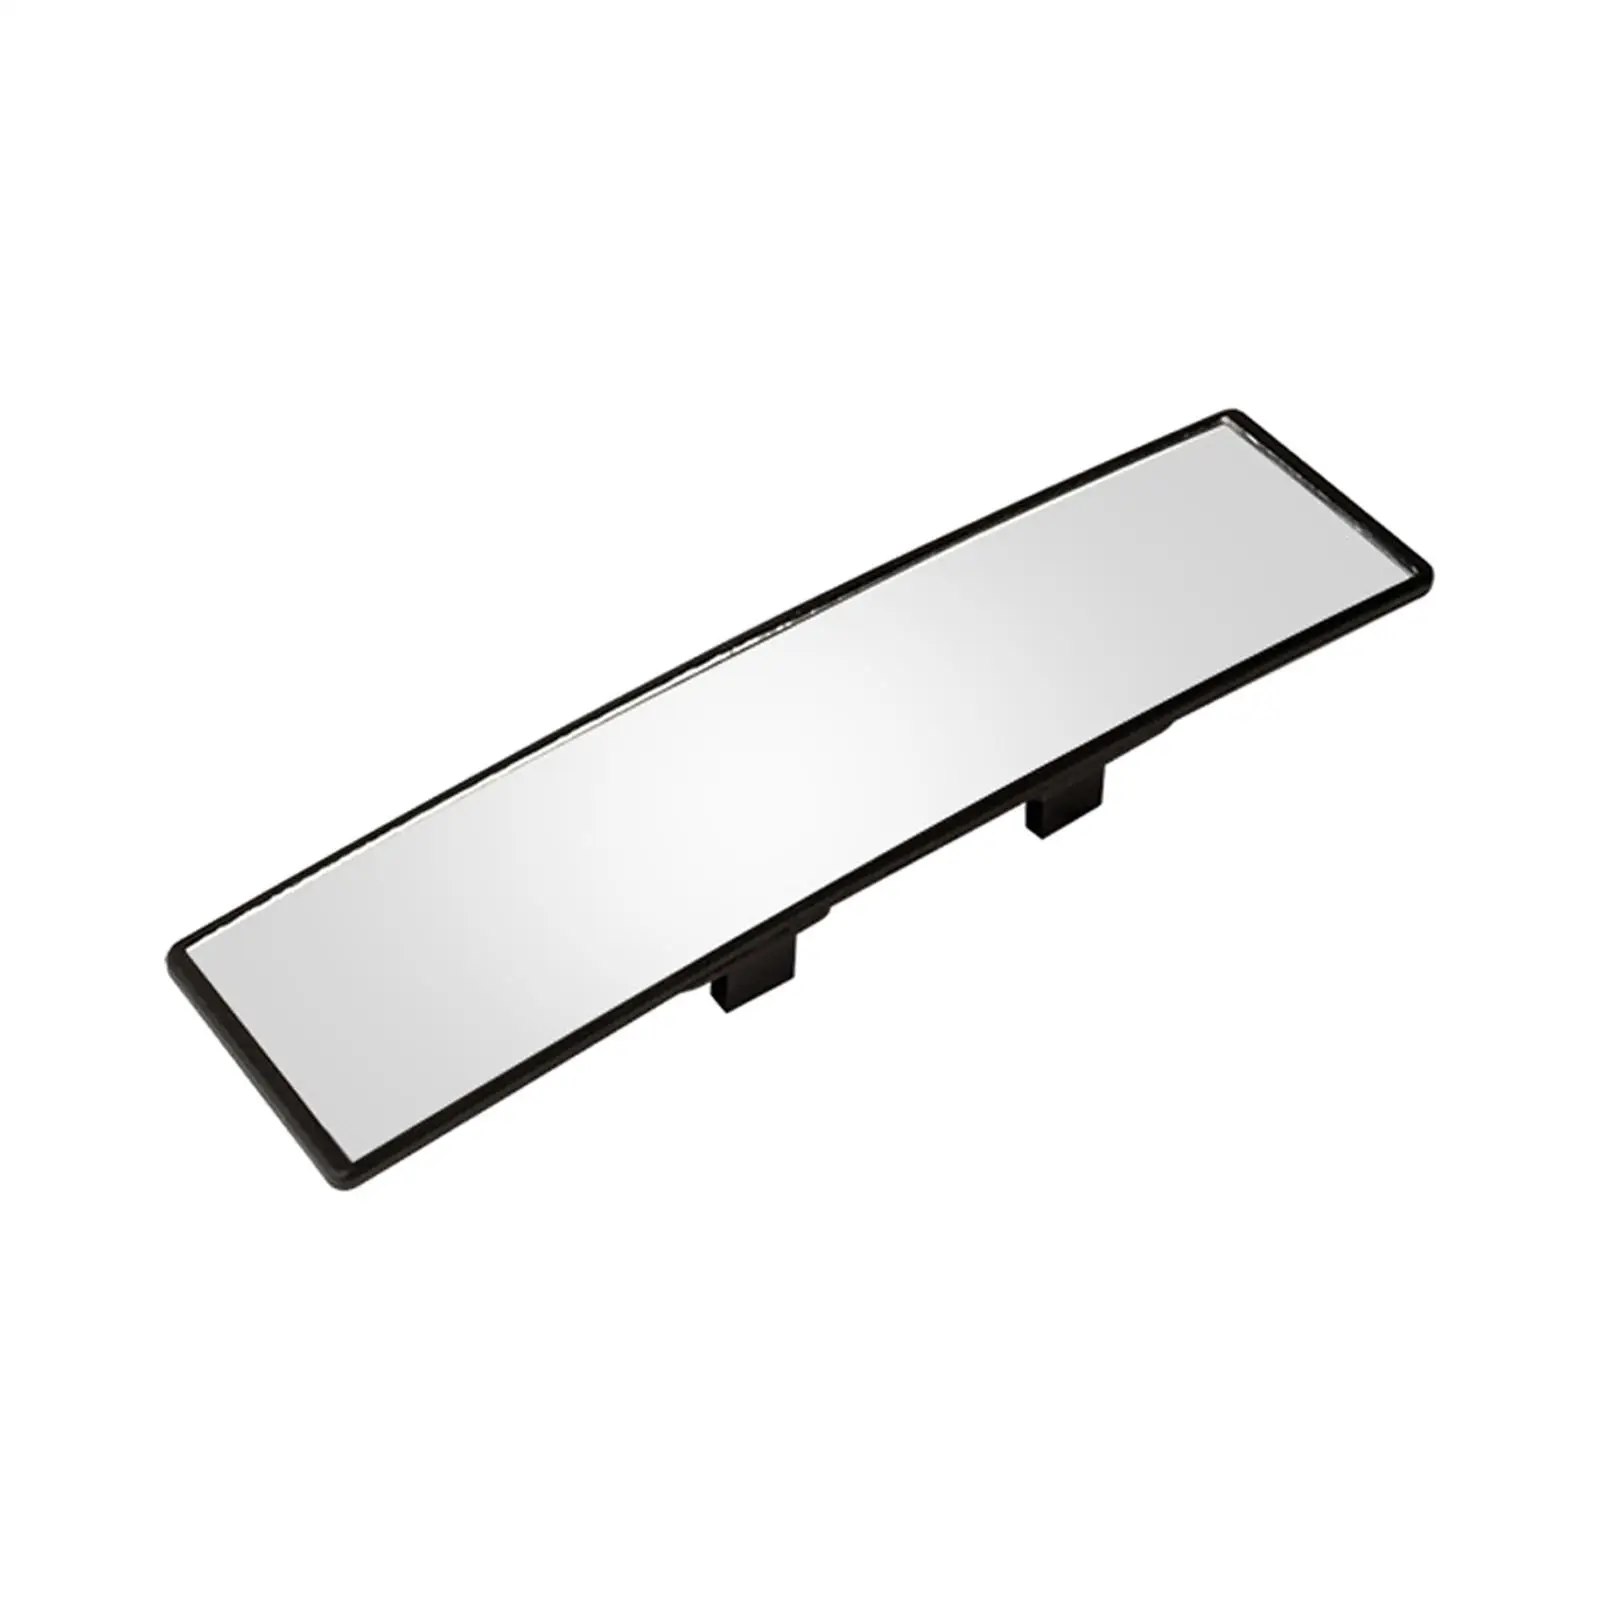 Rear View Mirror Clip on Wide Angle Mirror for Automobile Van Trucks